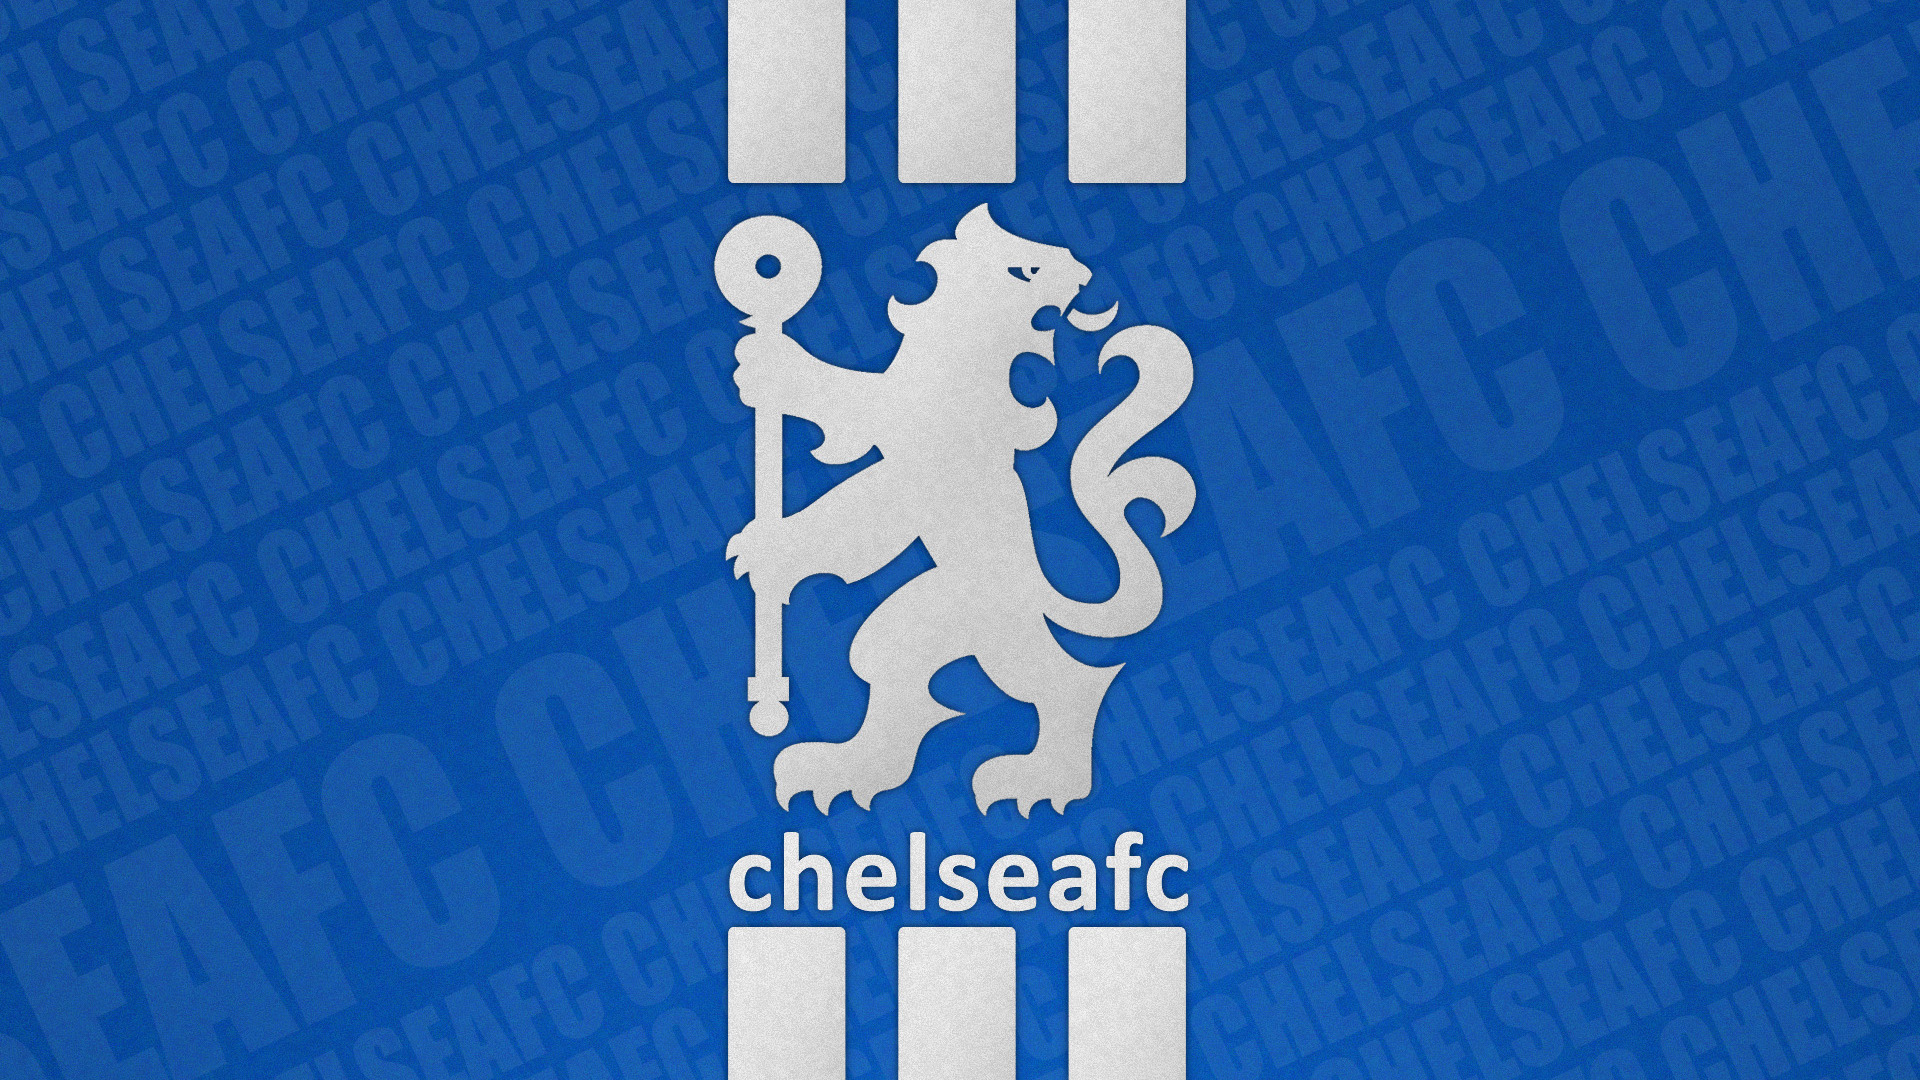 chelsea fc wallpapers